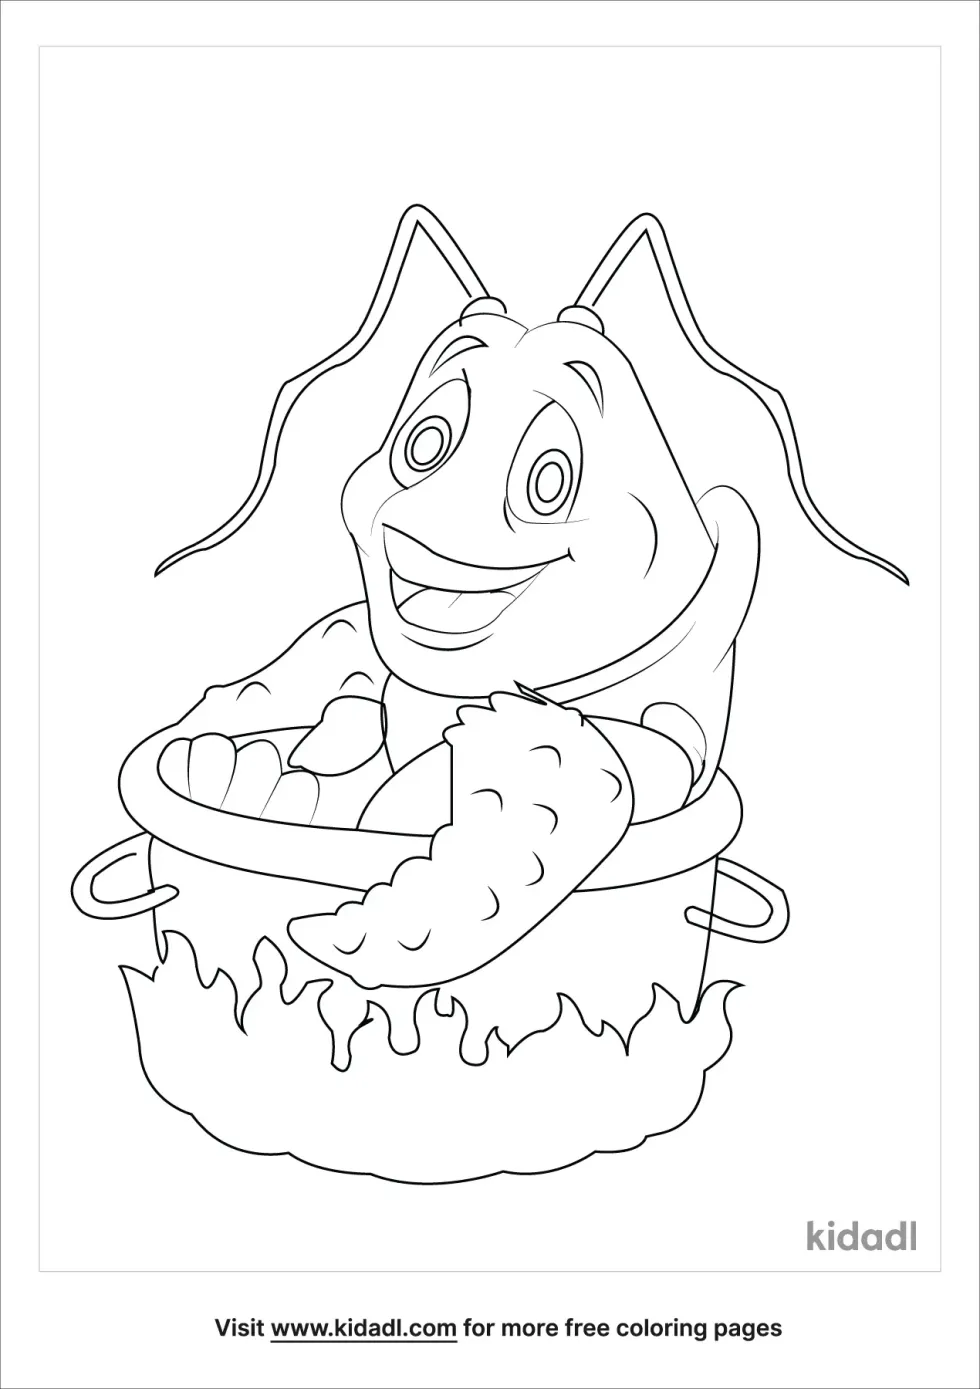 Spiny Lobster Coloring Page